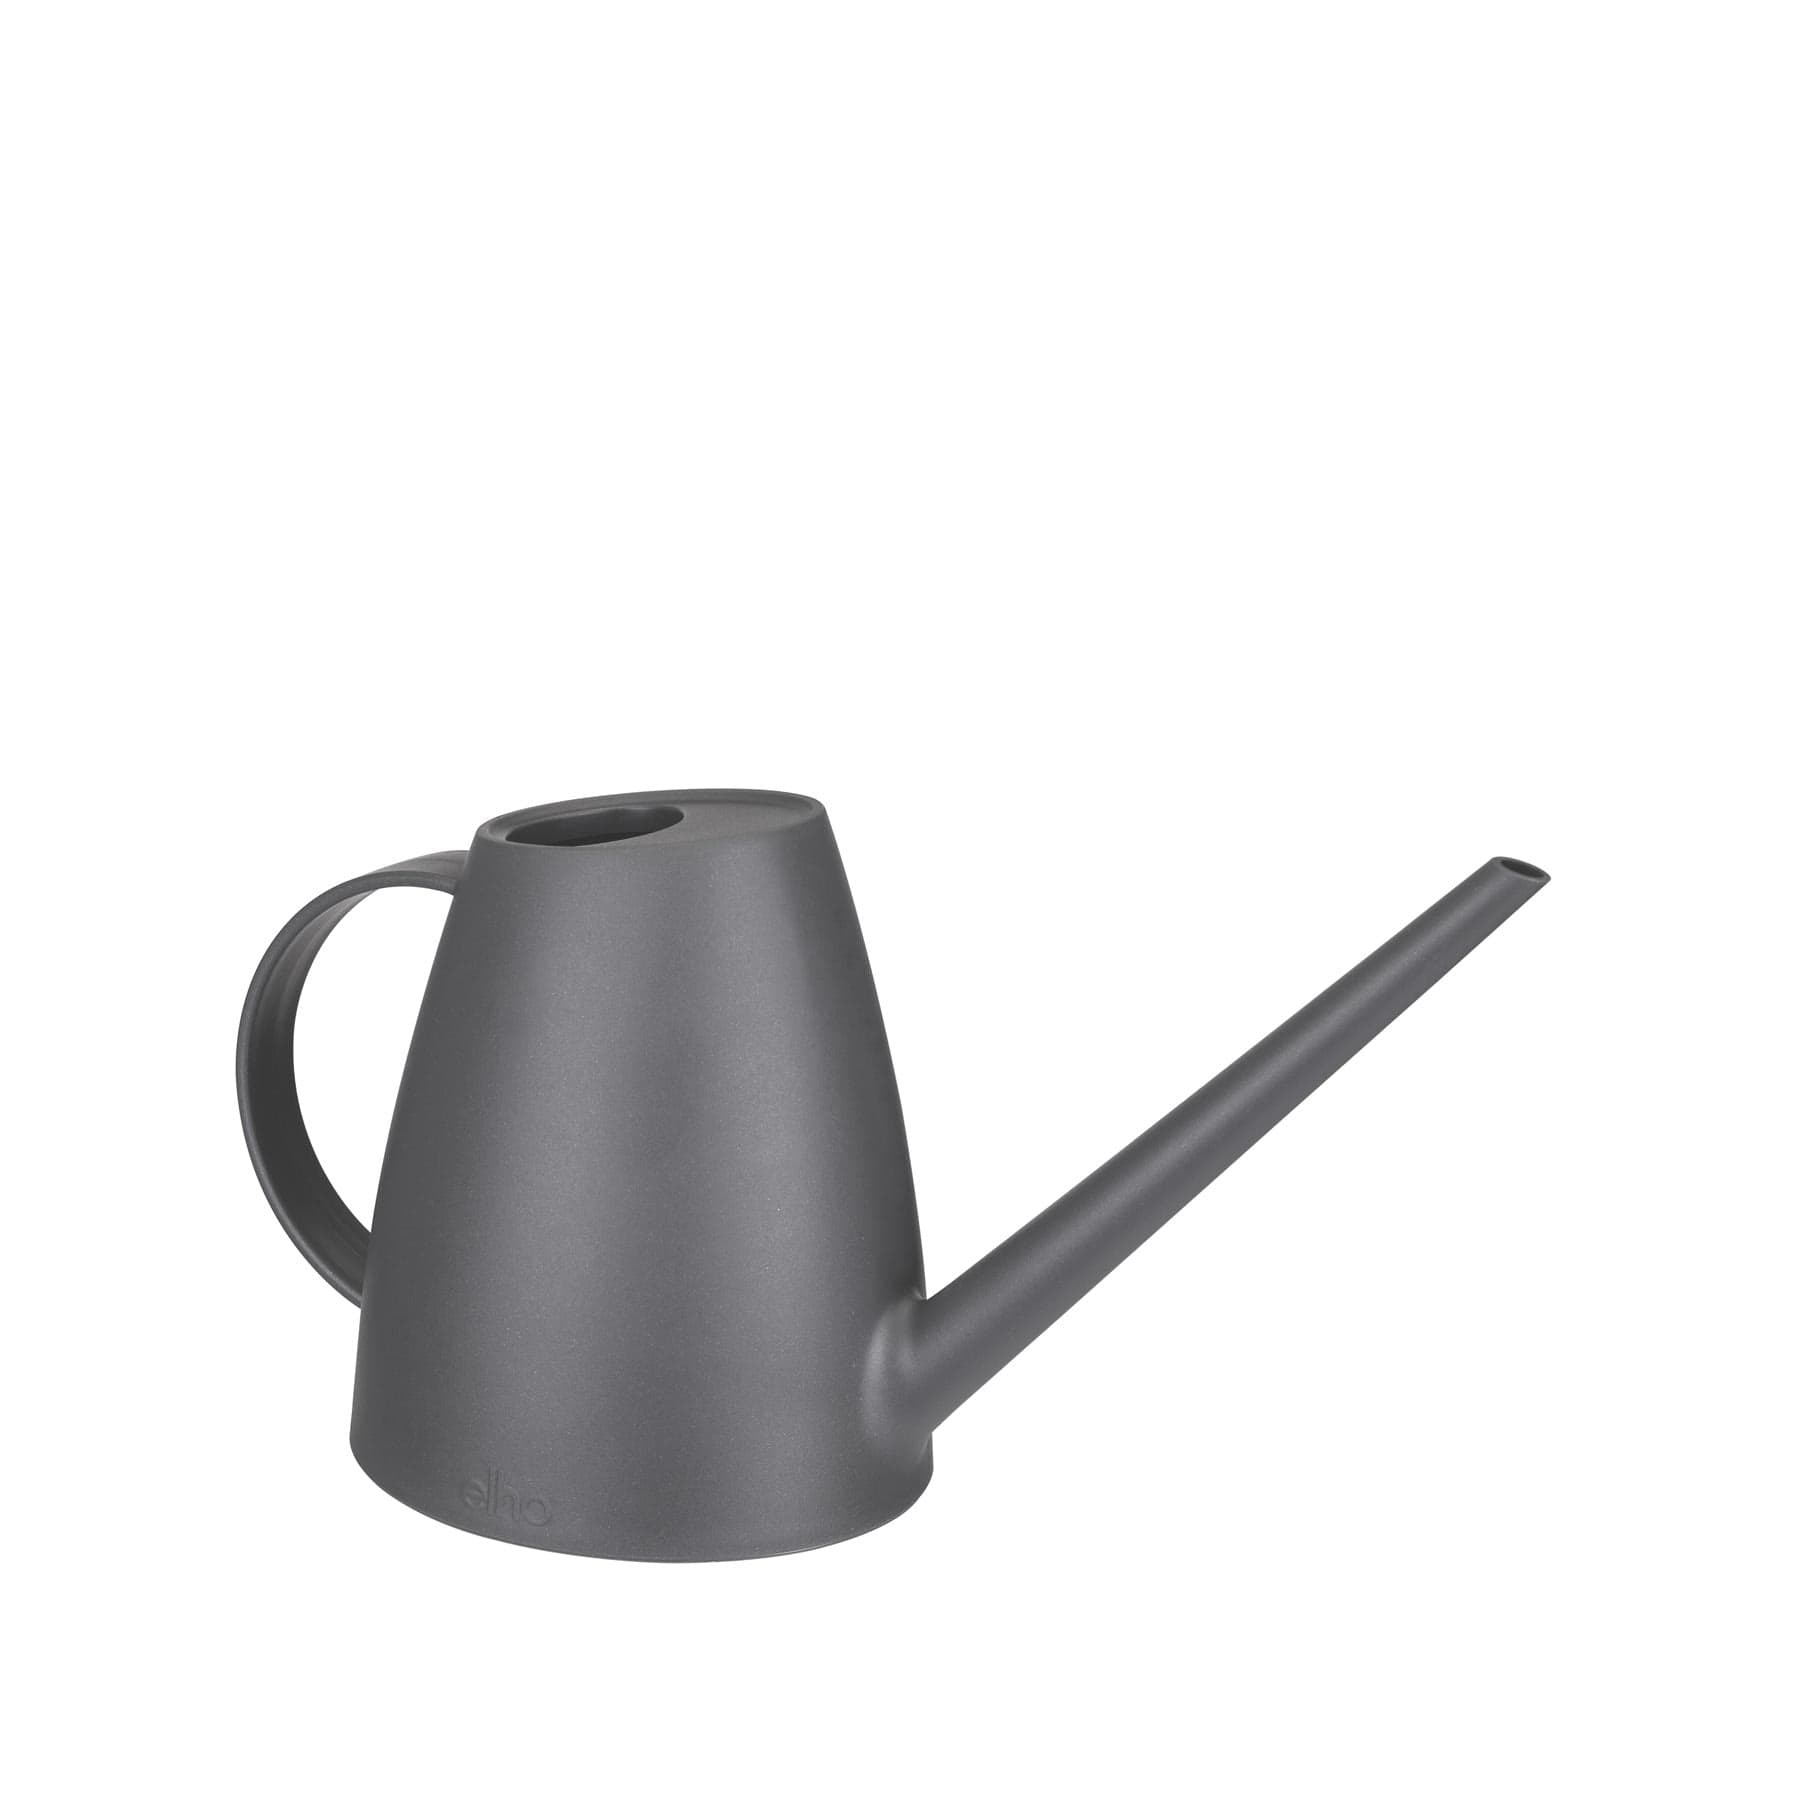 Brussels watering can 1.8l anthracite